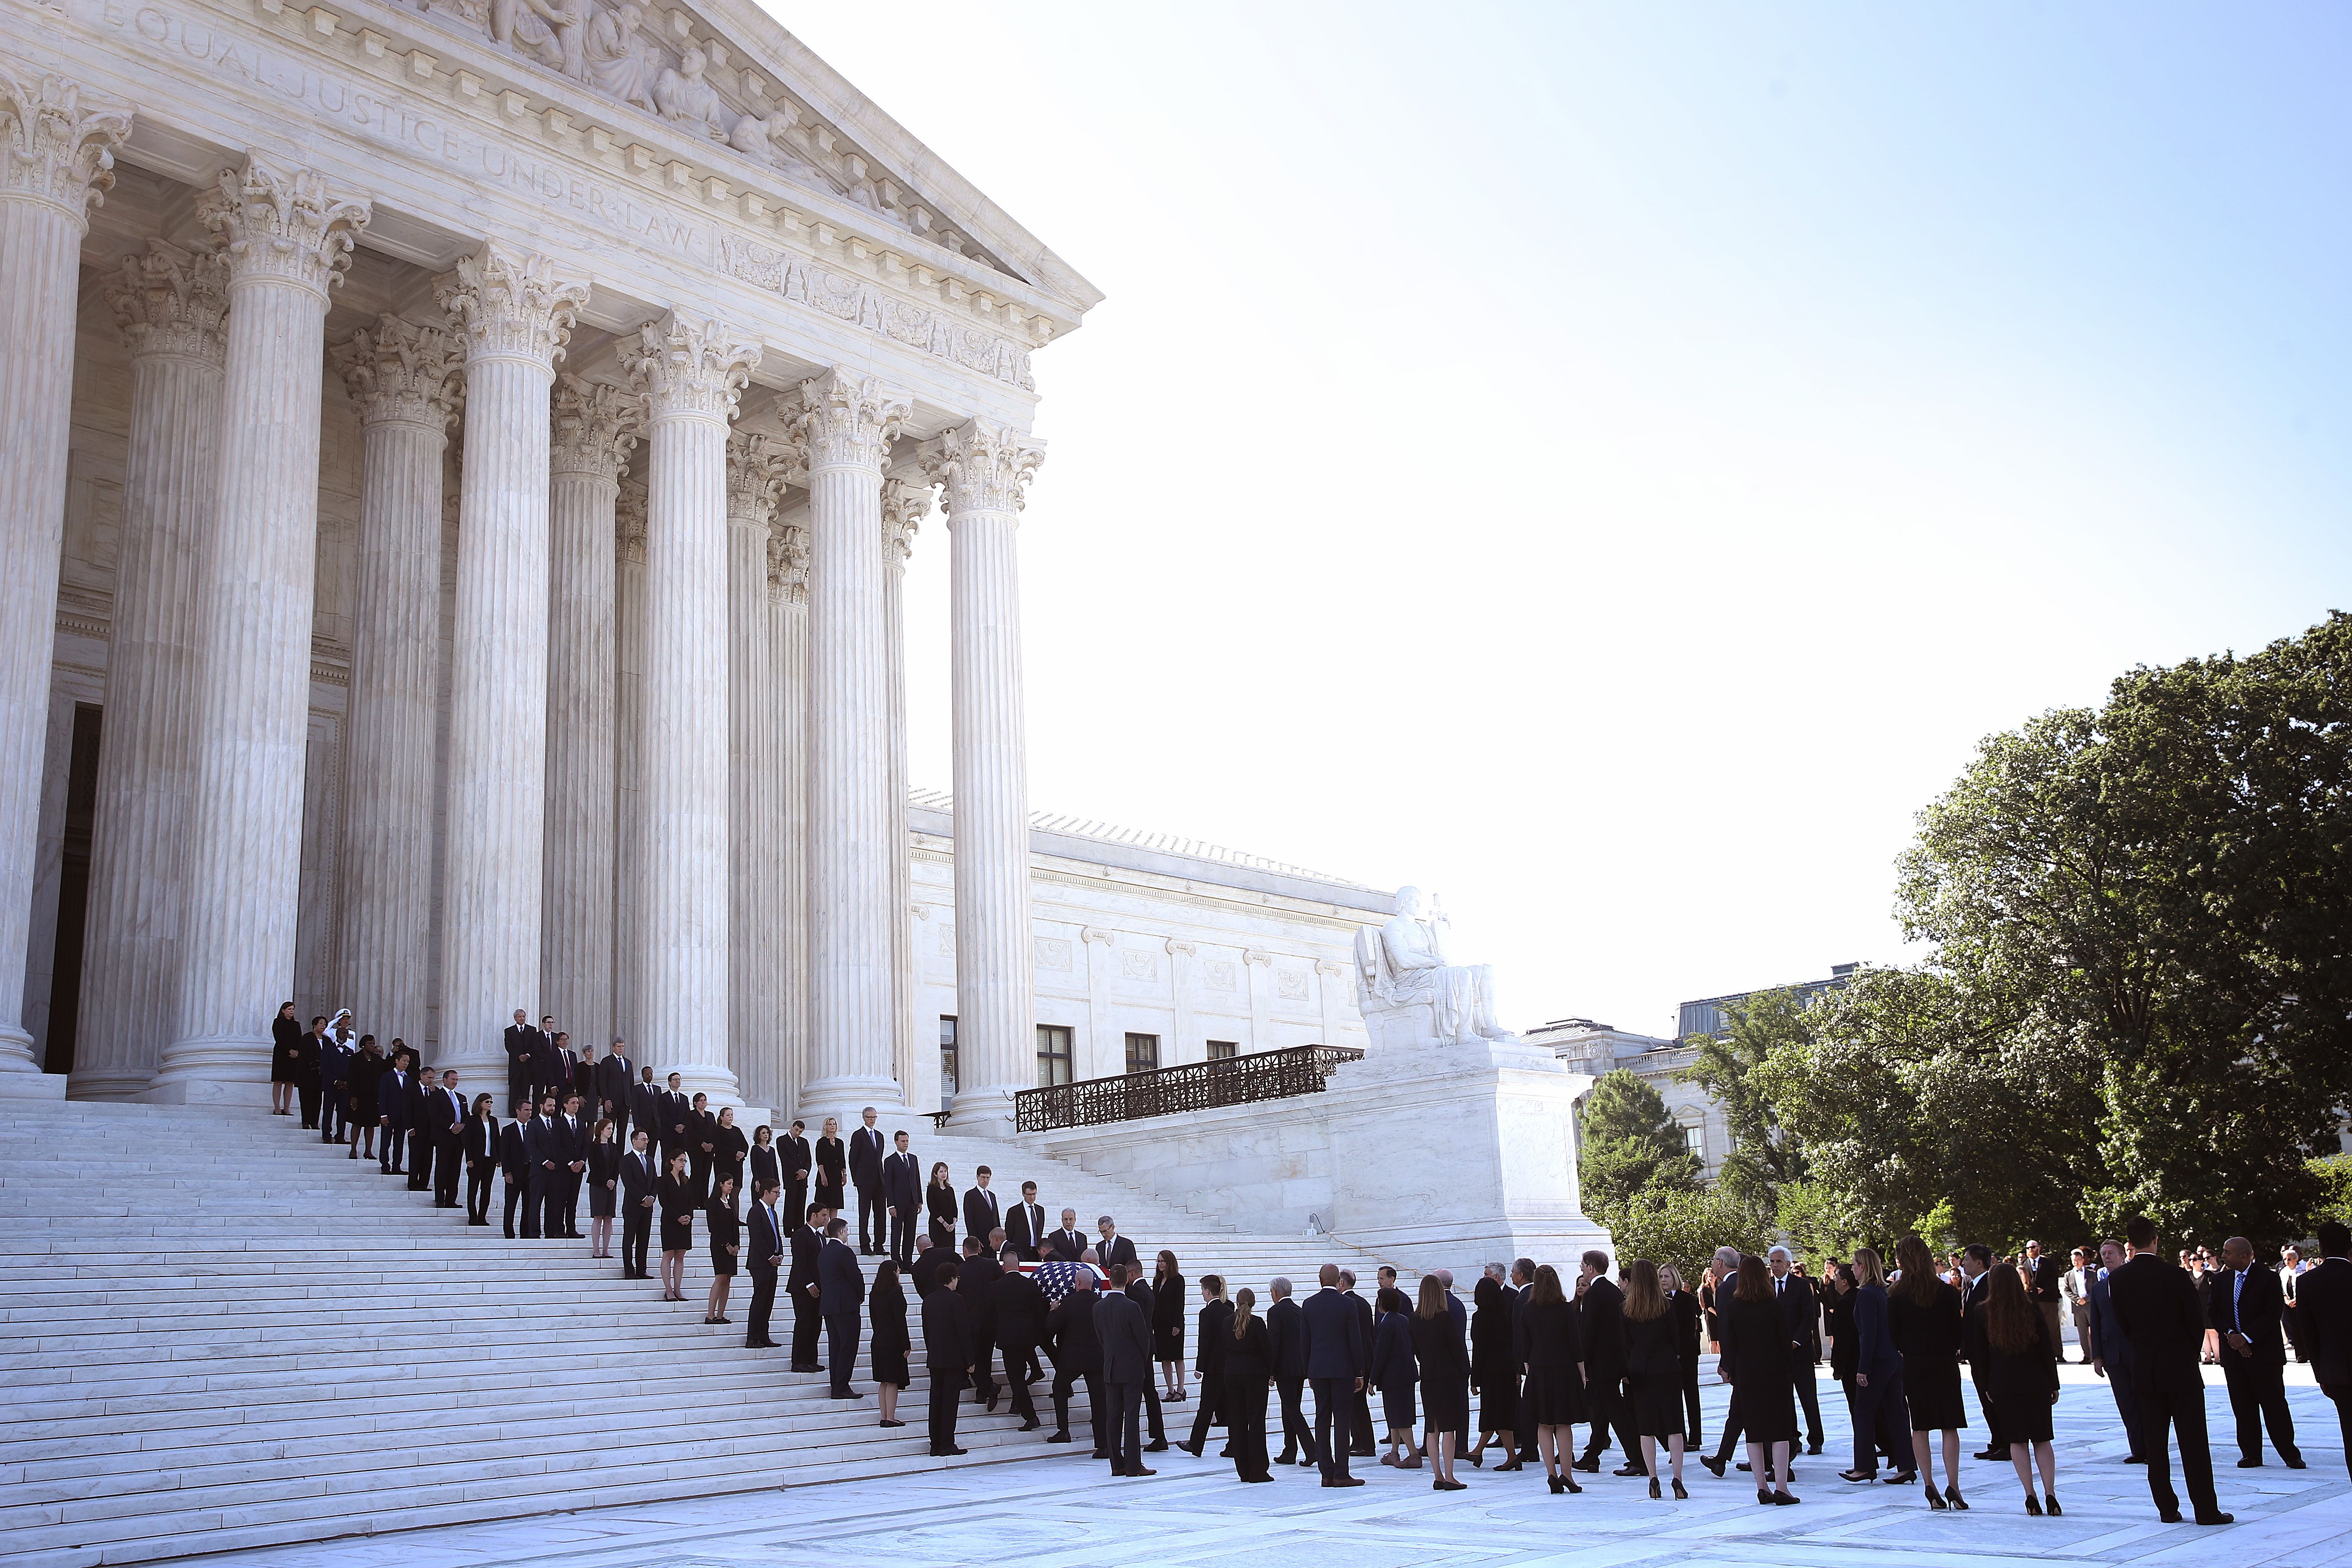 Members of the U.S. Supreme Court police serving as pallbearers carry the casket of the late Associate Justice John Paul Stevens up the steps of the U.S. Supreme Court 